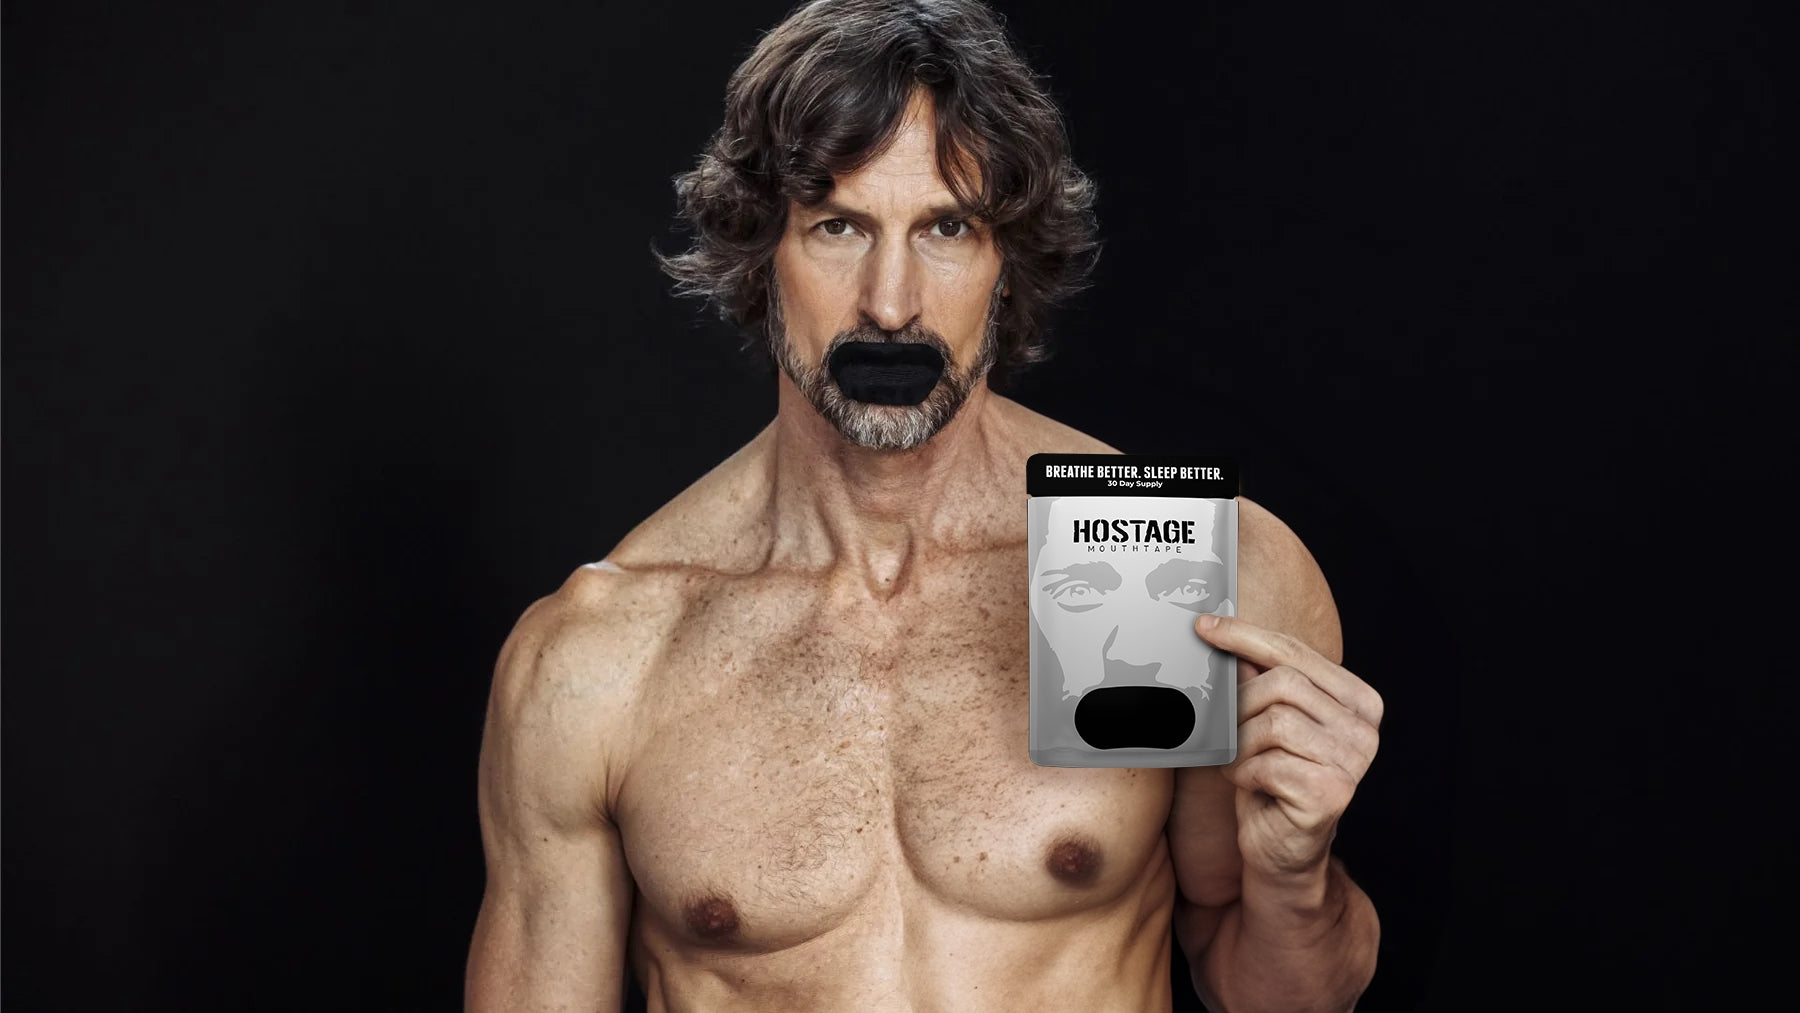 Shirtless man with taped mouth holding a product box with 'HOSTAGE MOUTHTAPE' text.